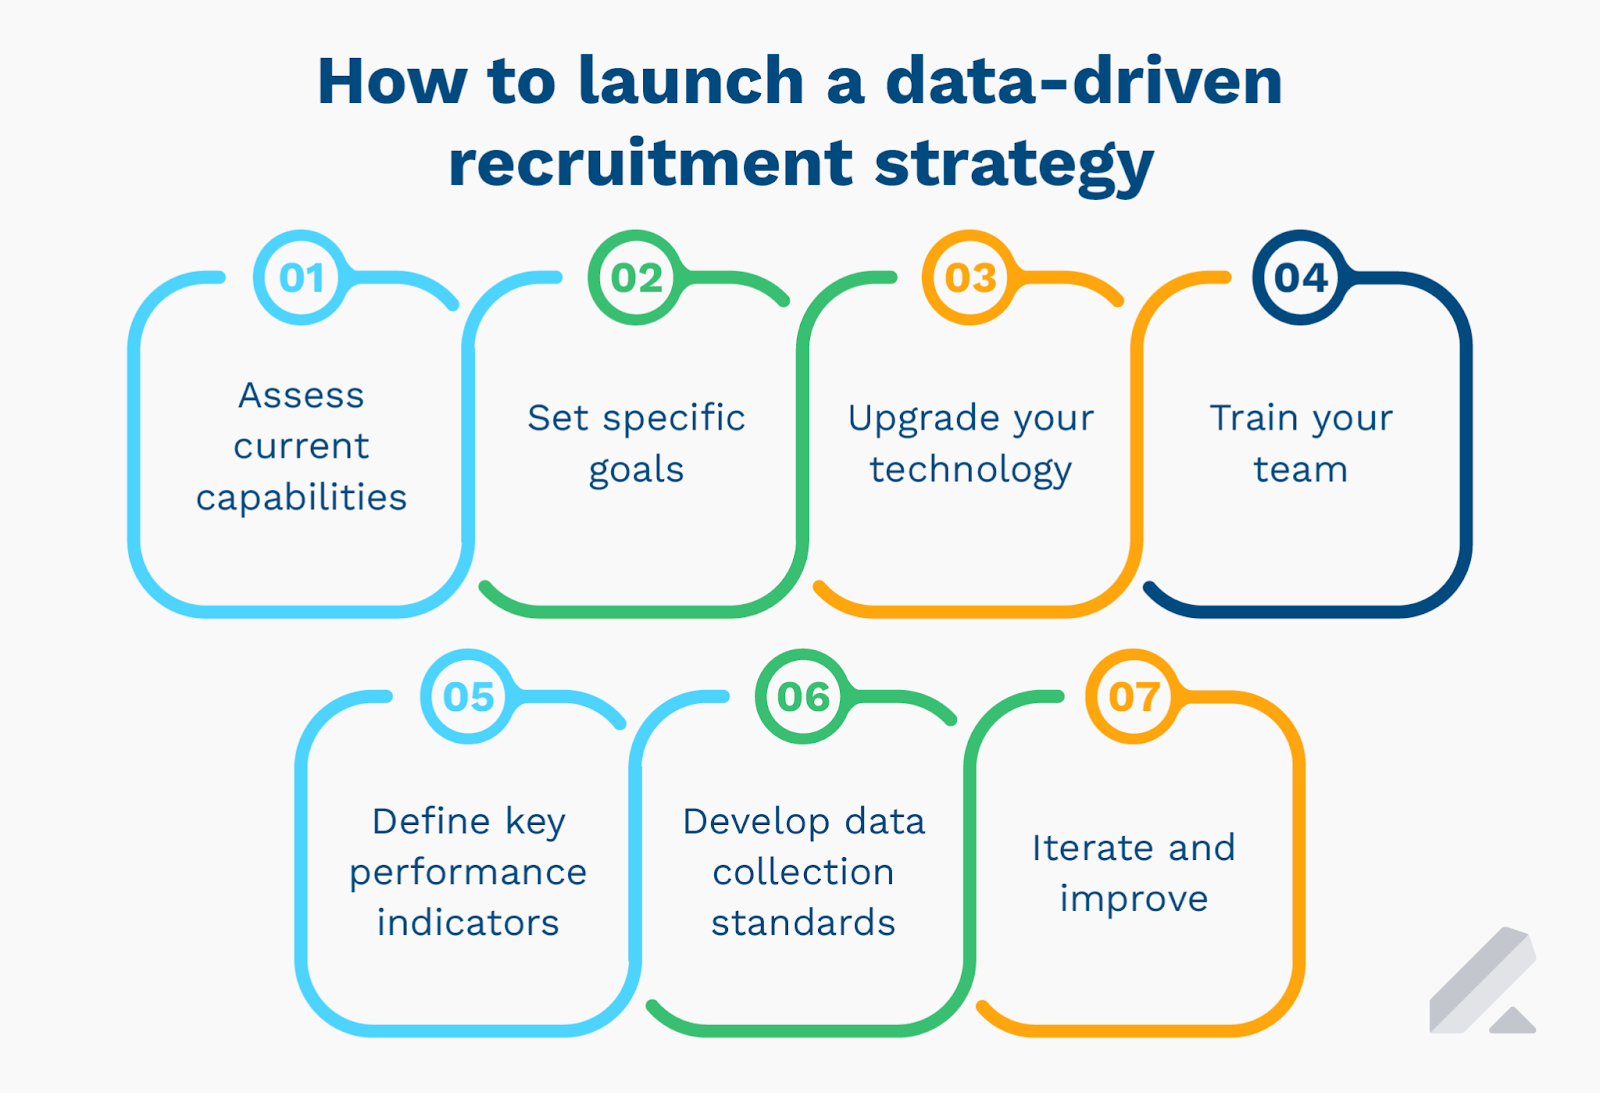 The steps for launching a data-driven recruitment strategy (as explained below)